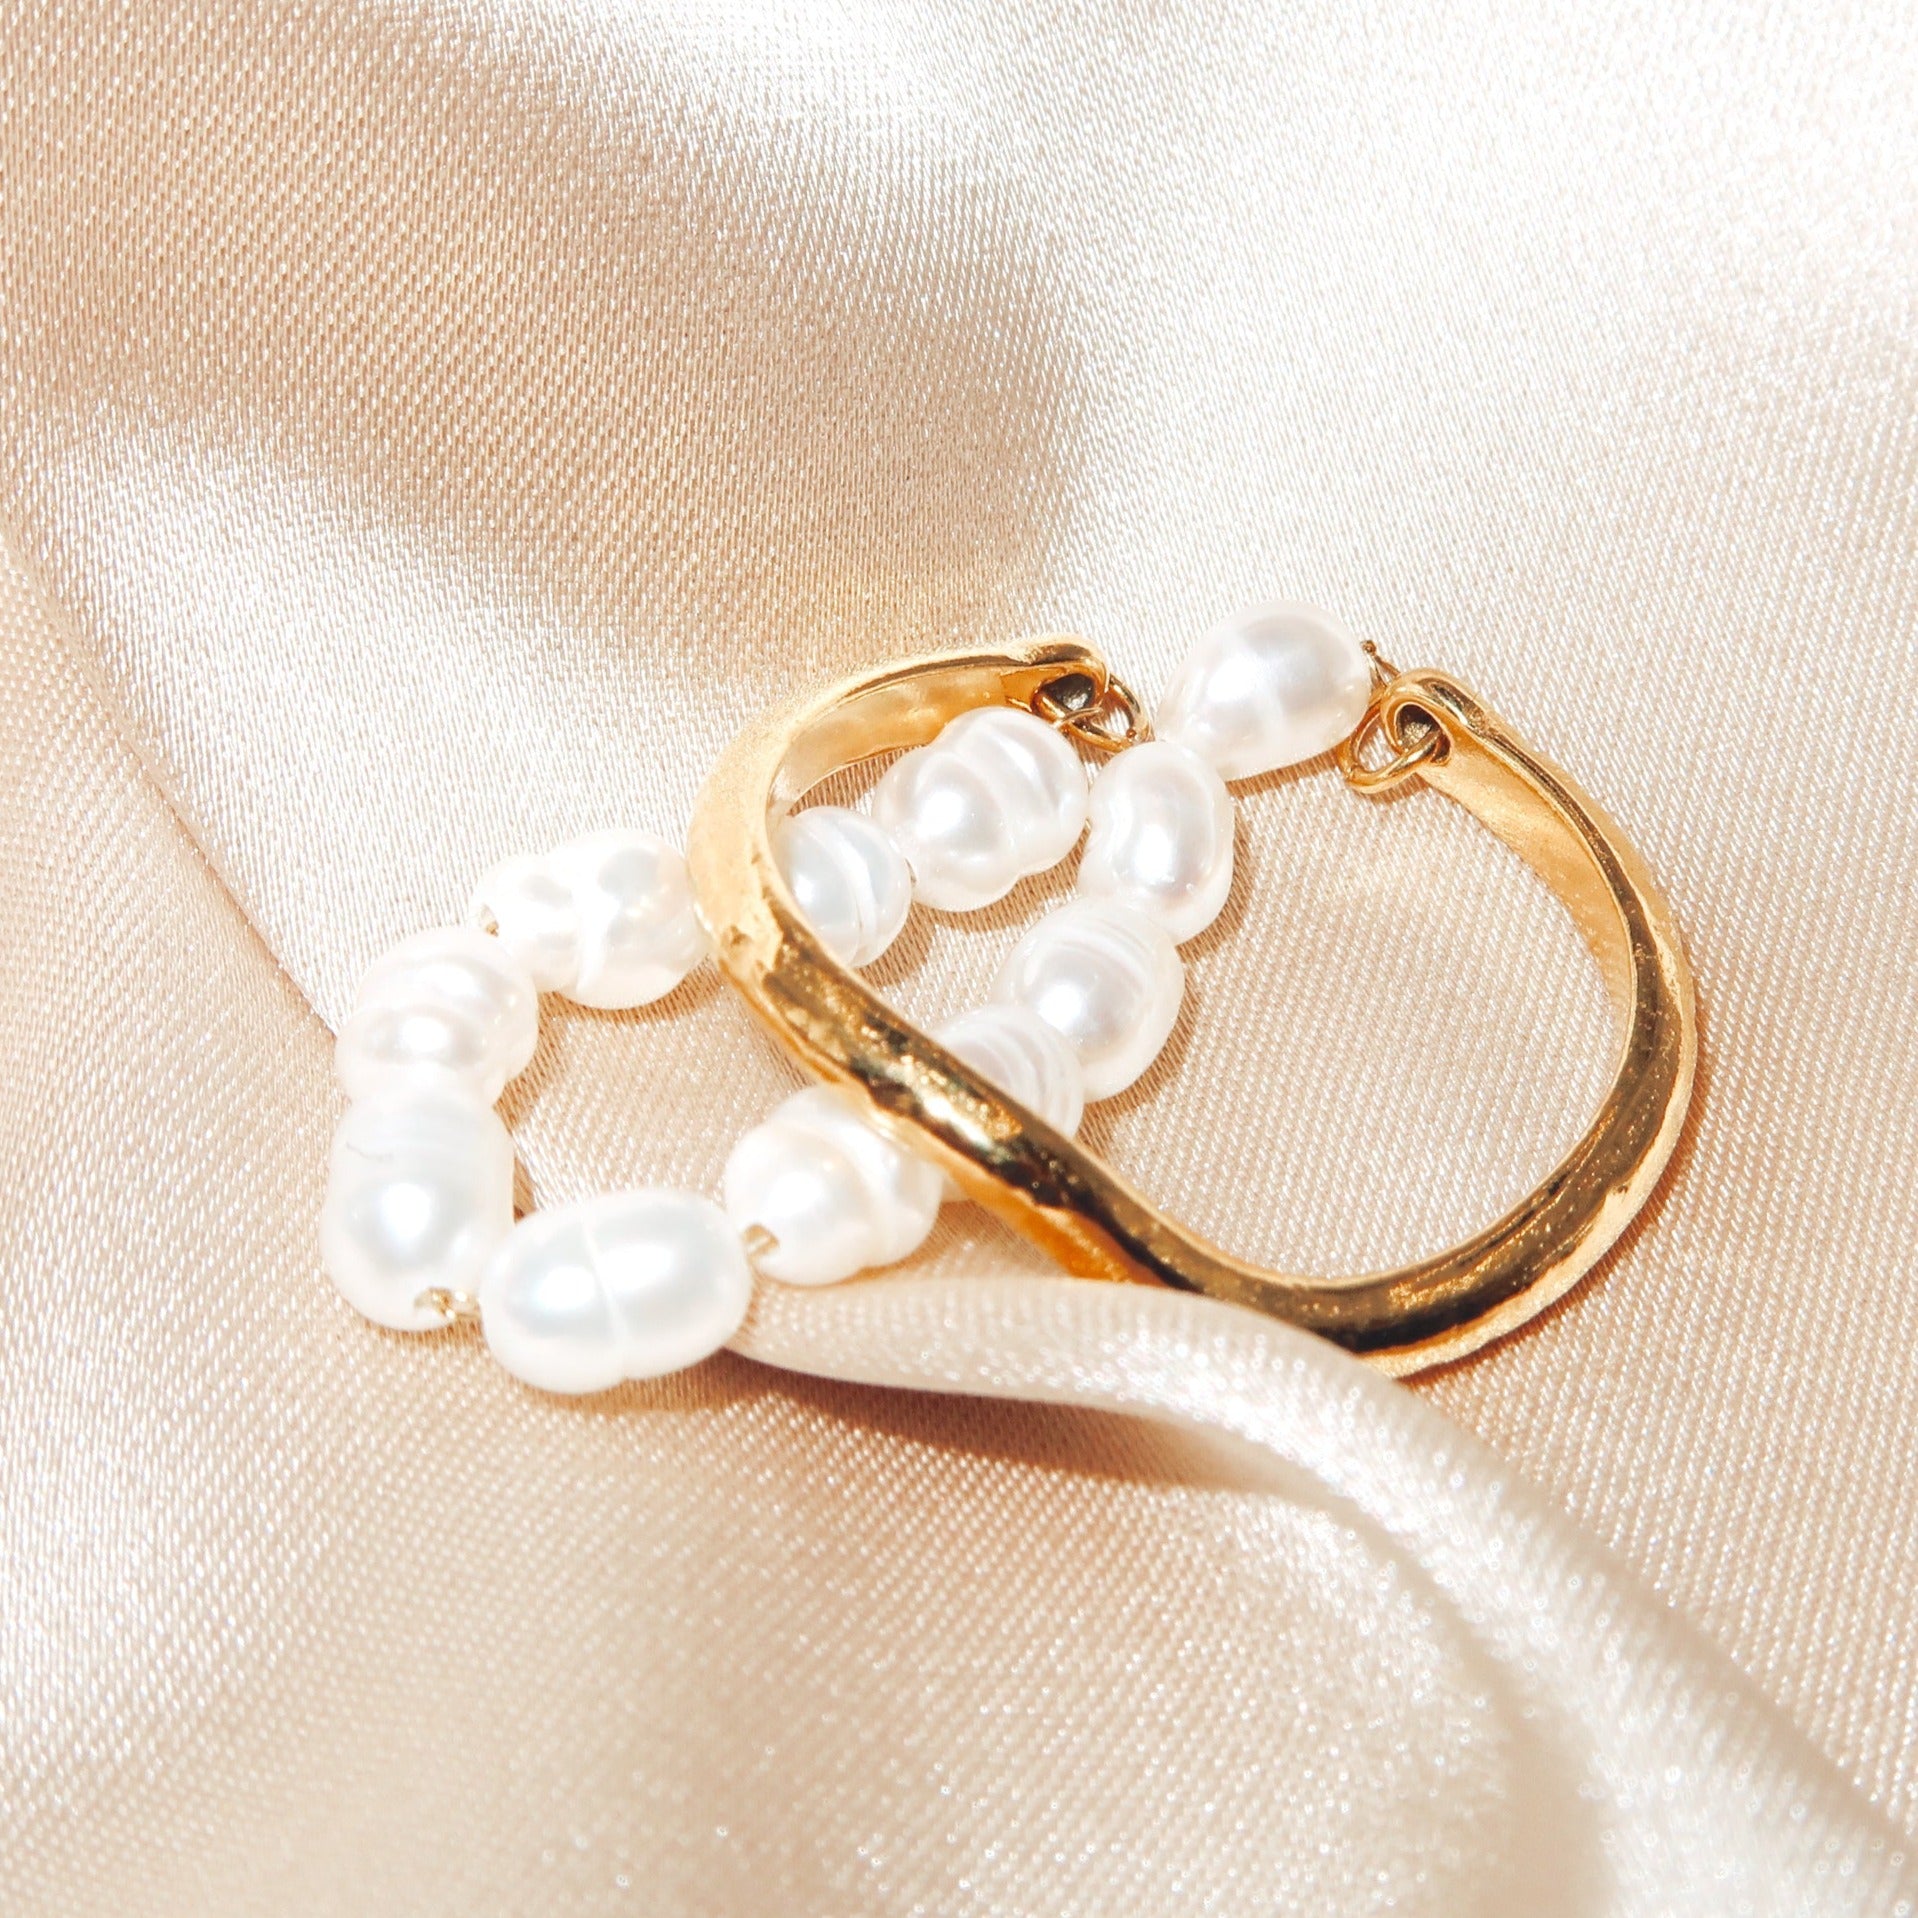 KAIA - 18K PVD Gold Plated Double Hoop Ring with Freshwater Pearls - Mixed Metals